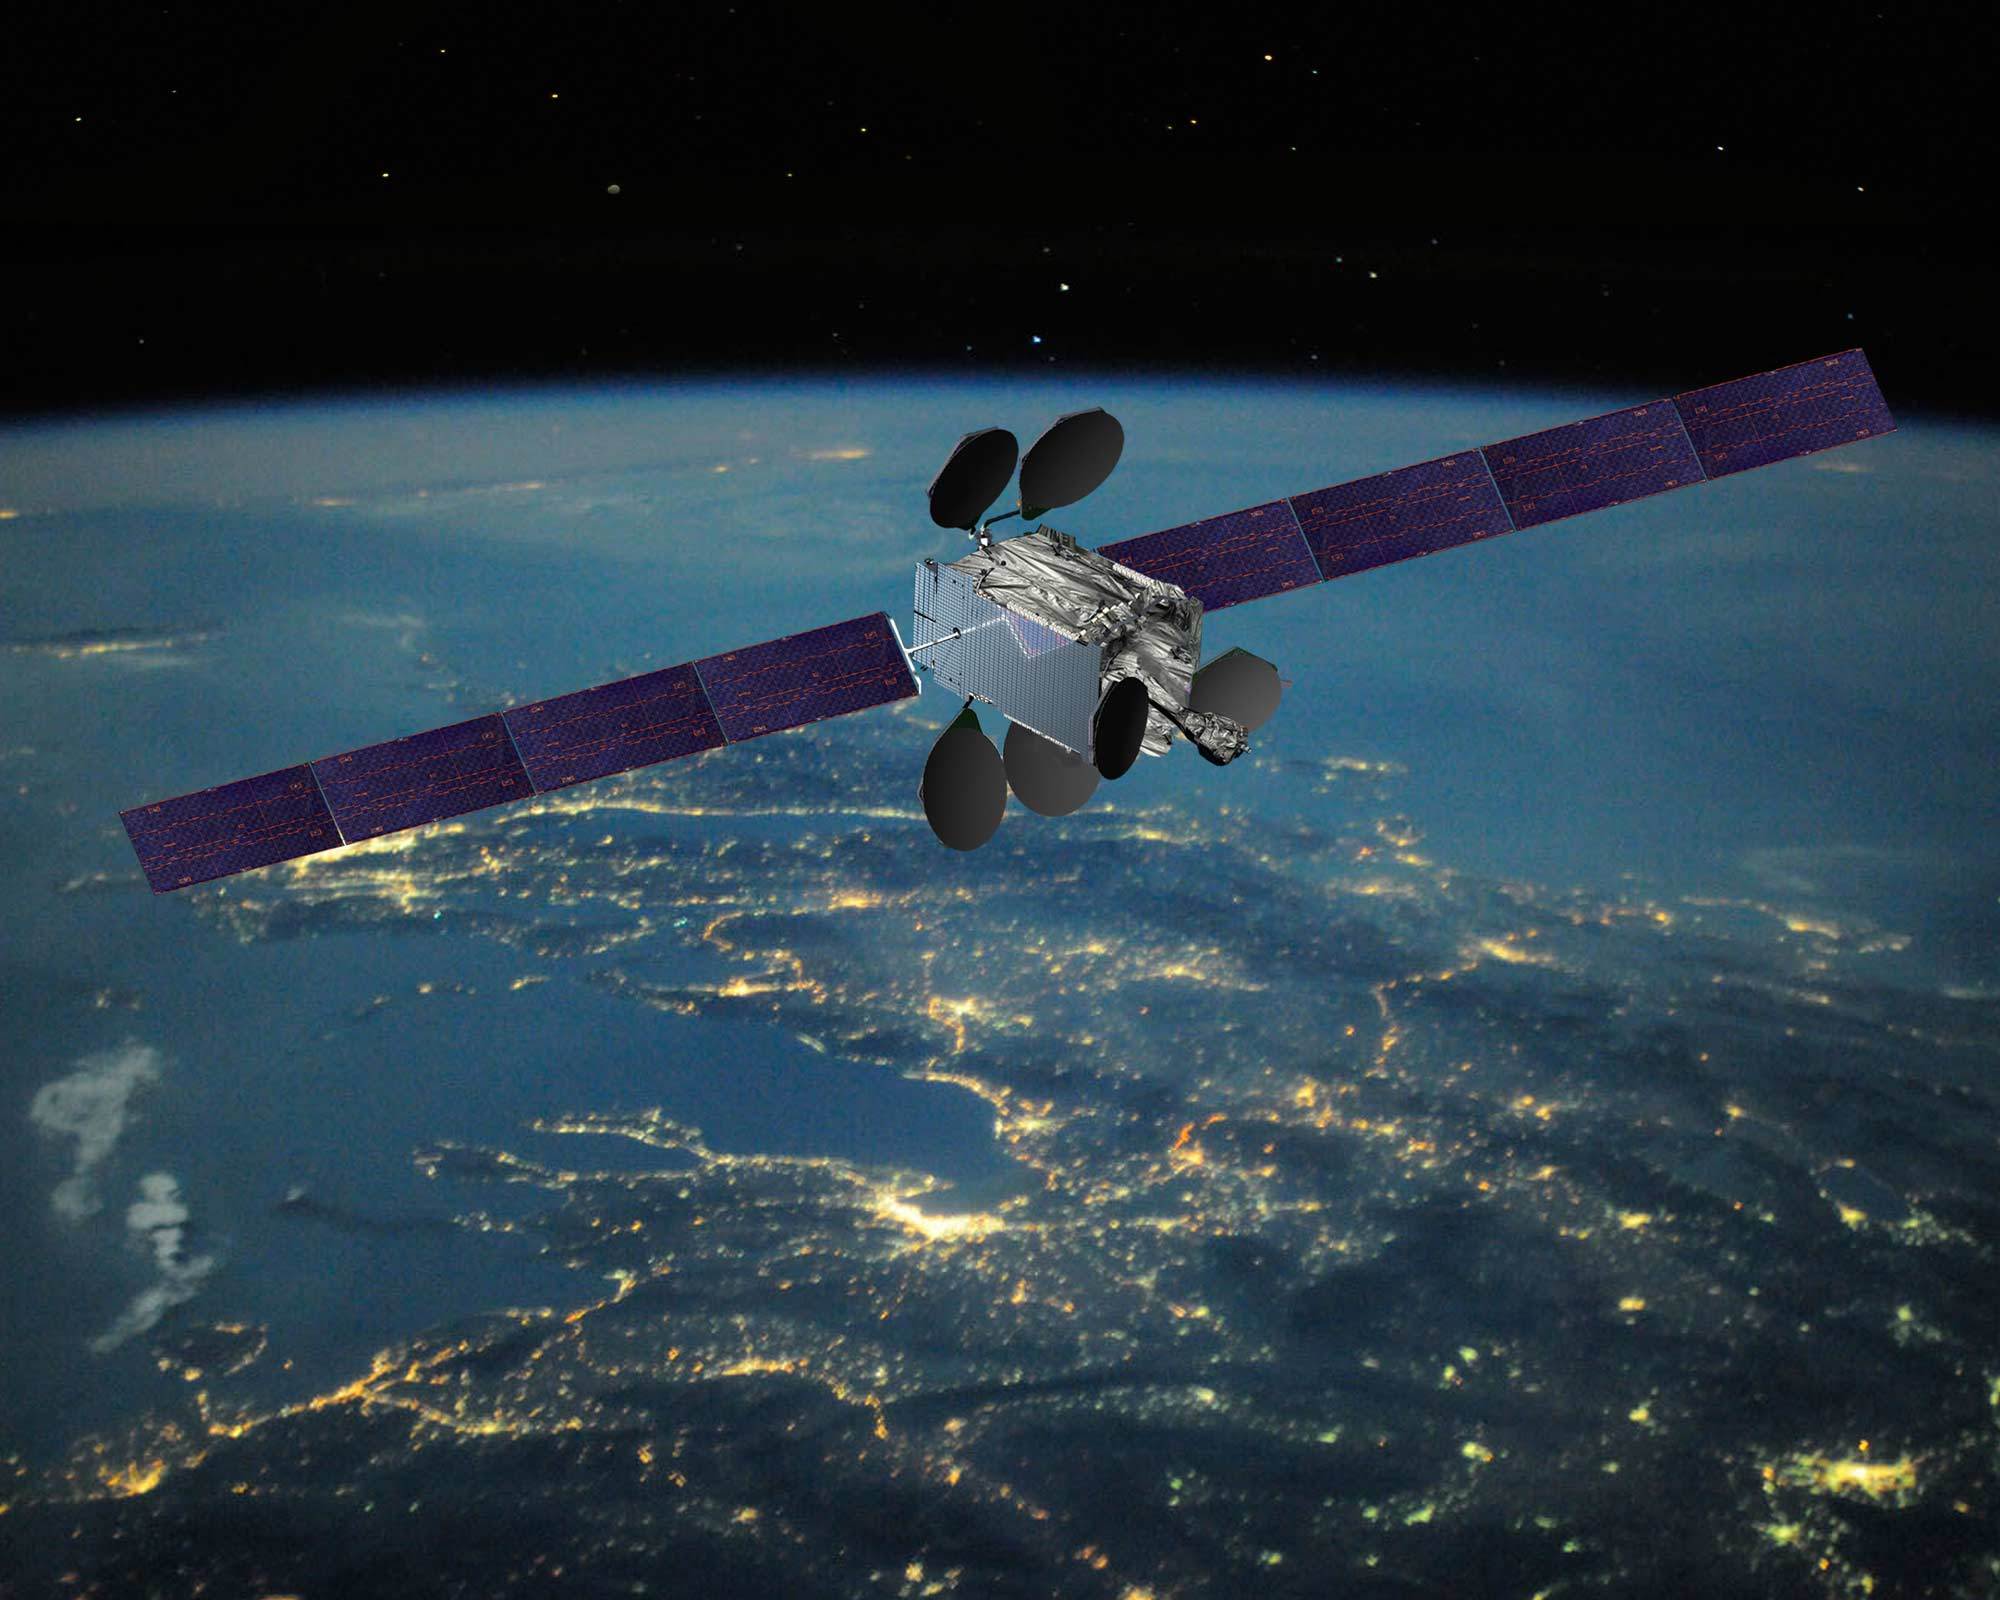 Intelsat satellite in service after overcoming engine trouble – Spaceflight Now2000 x 1600